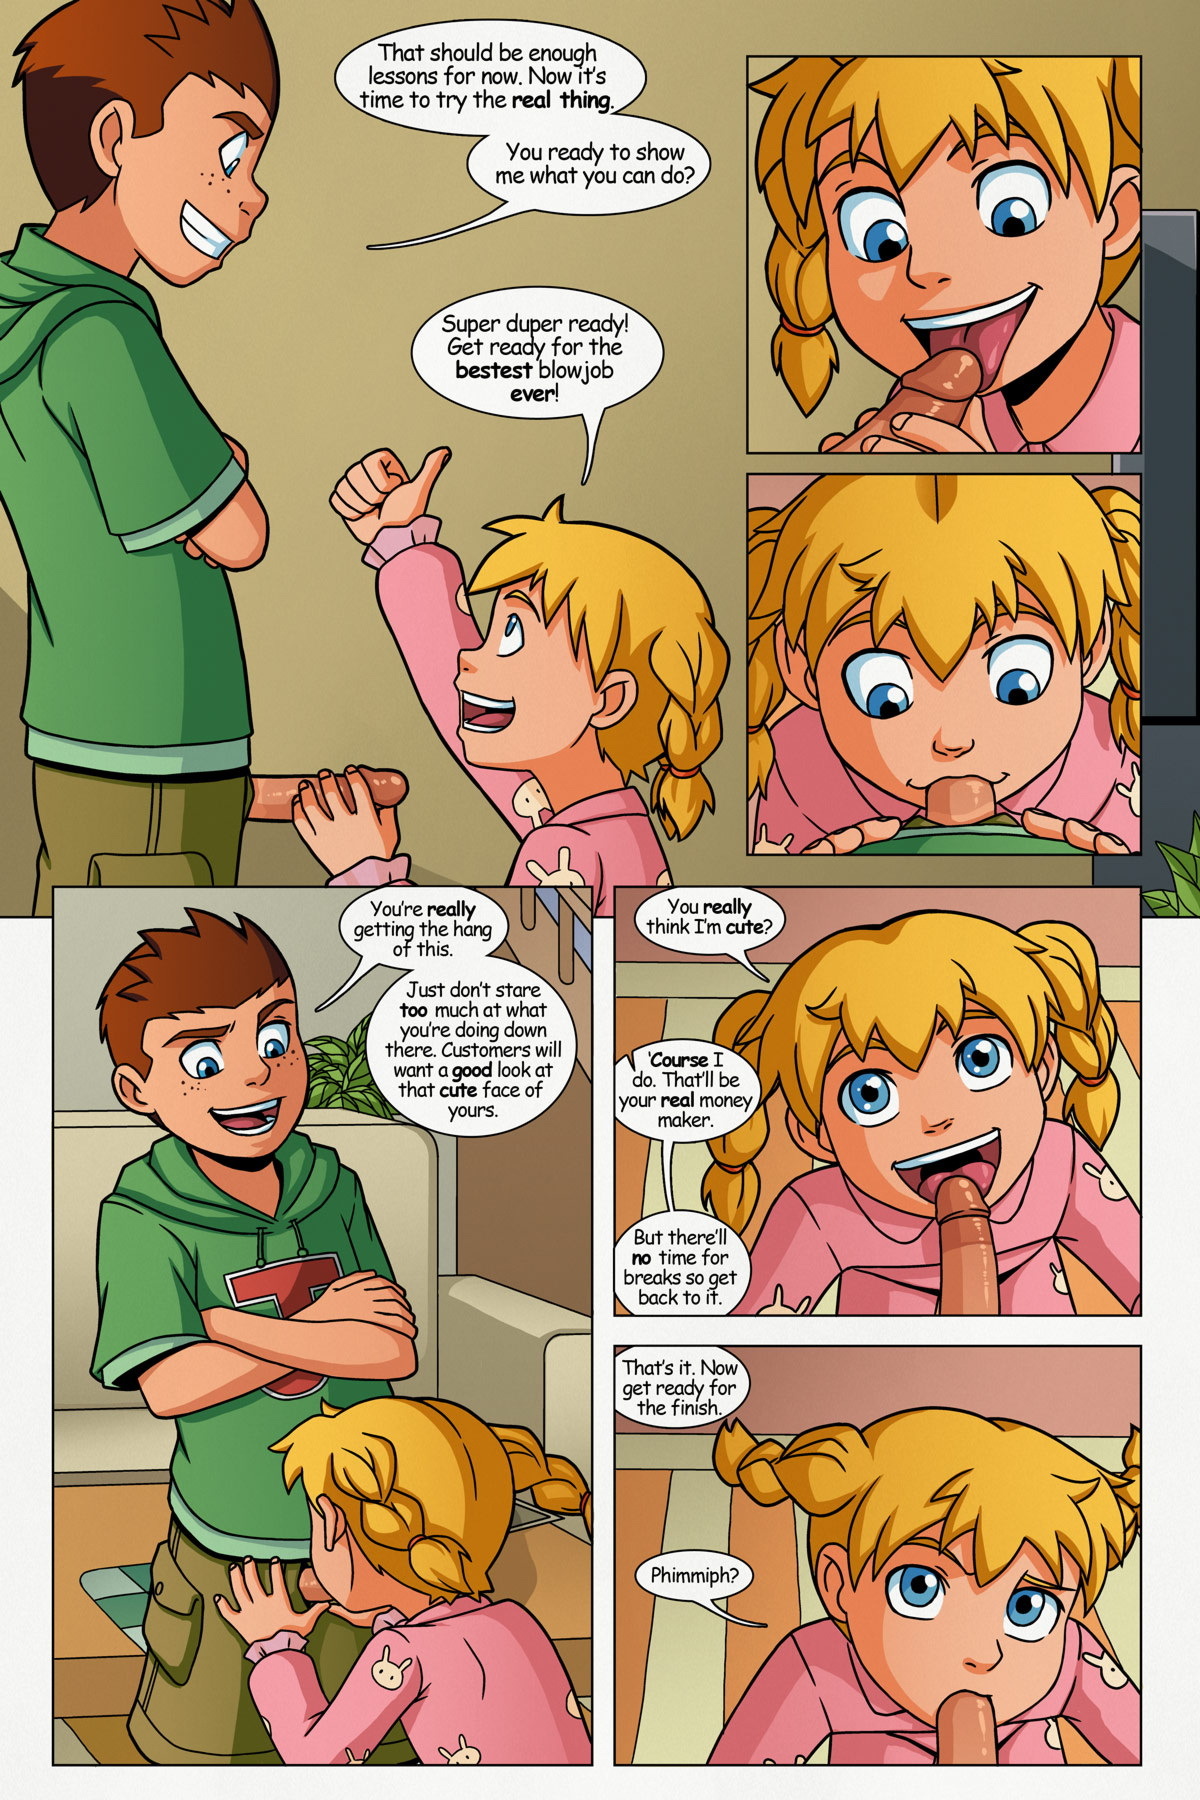 Katie's Training - Page 3